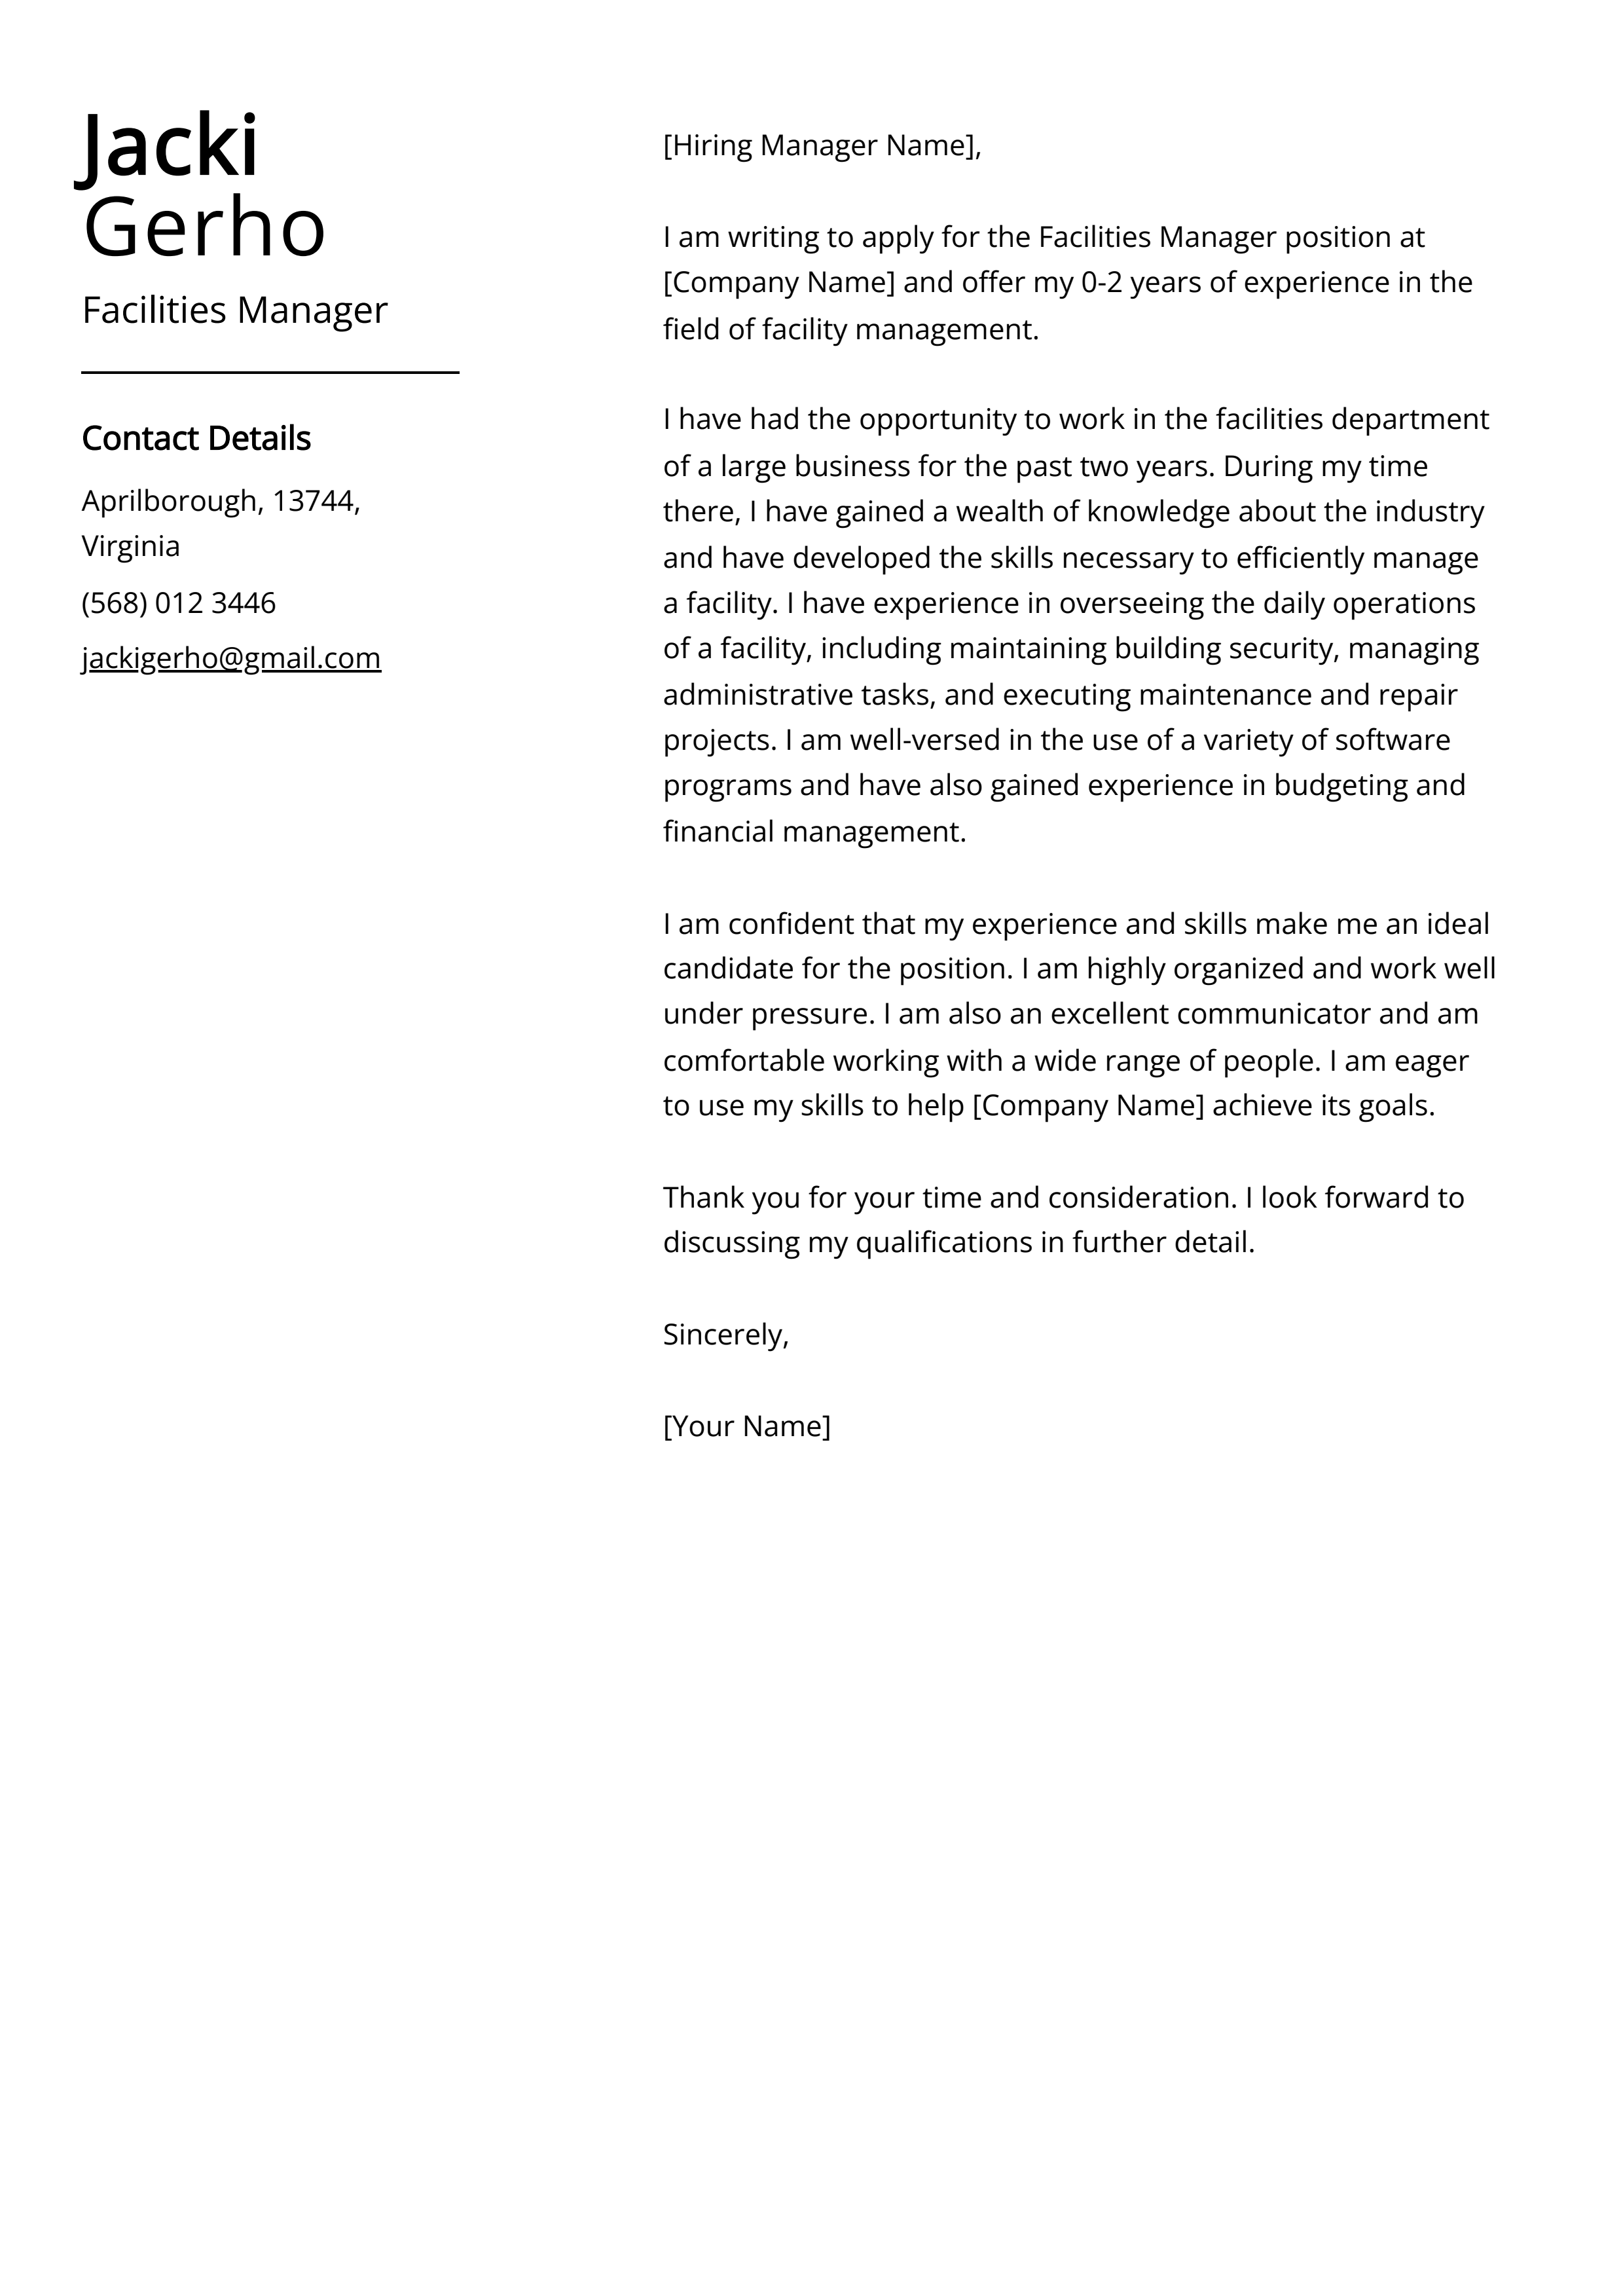 Facilities Manager Cover Letter Example